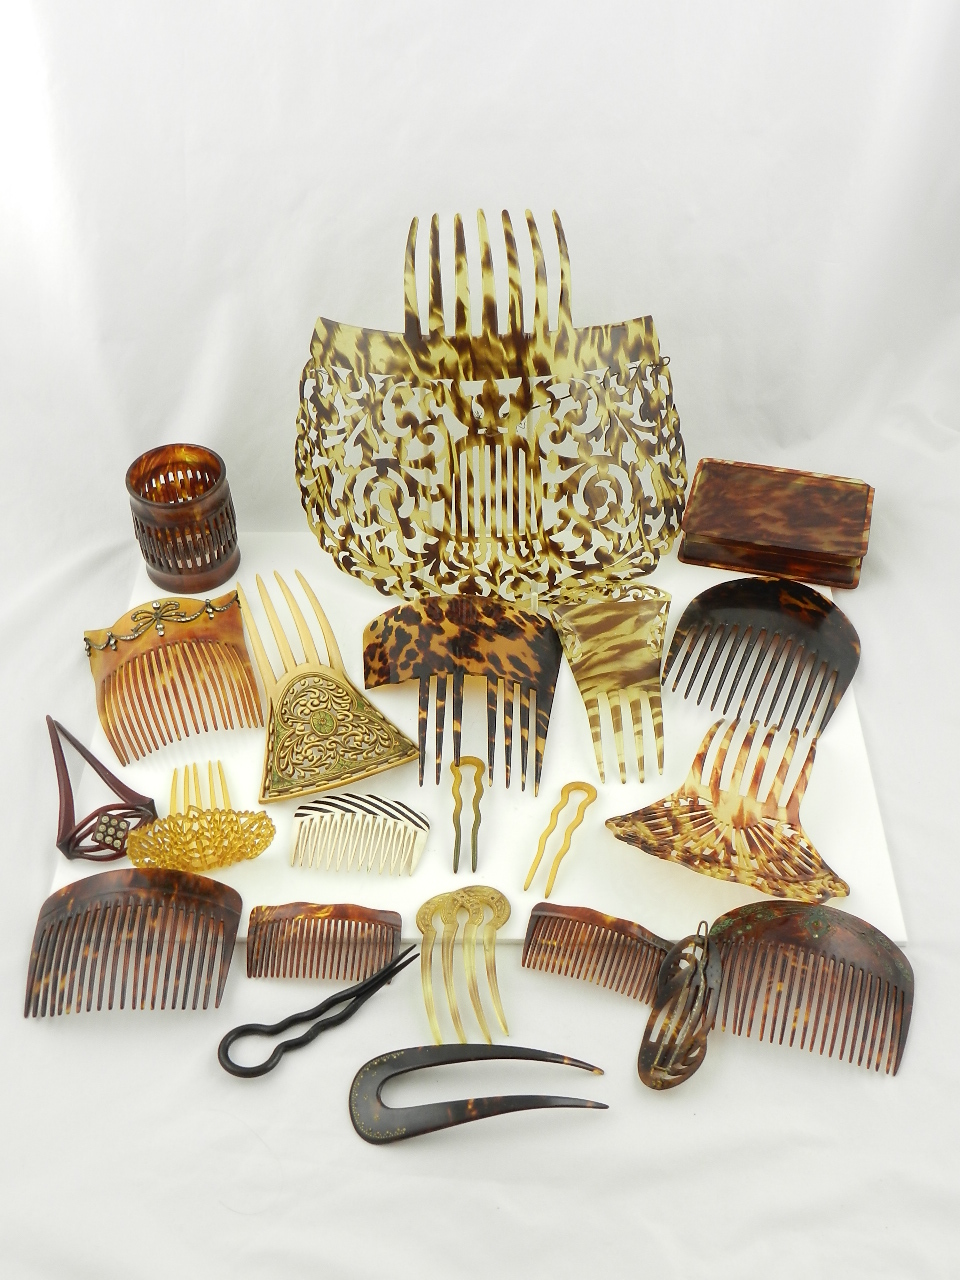 A collection of Spanish peineta hair combs and other related items.